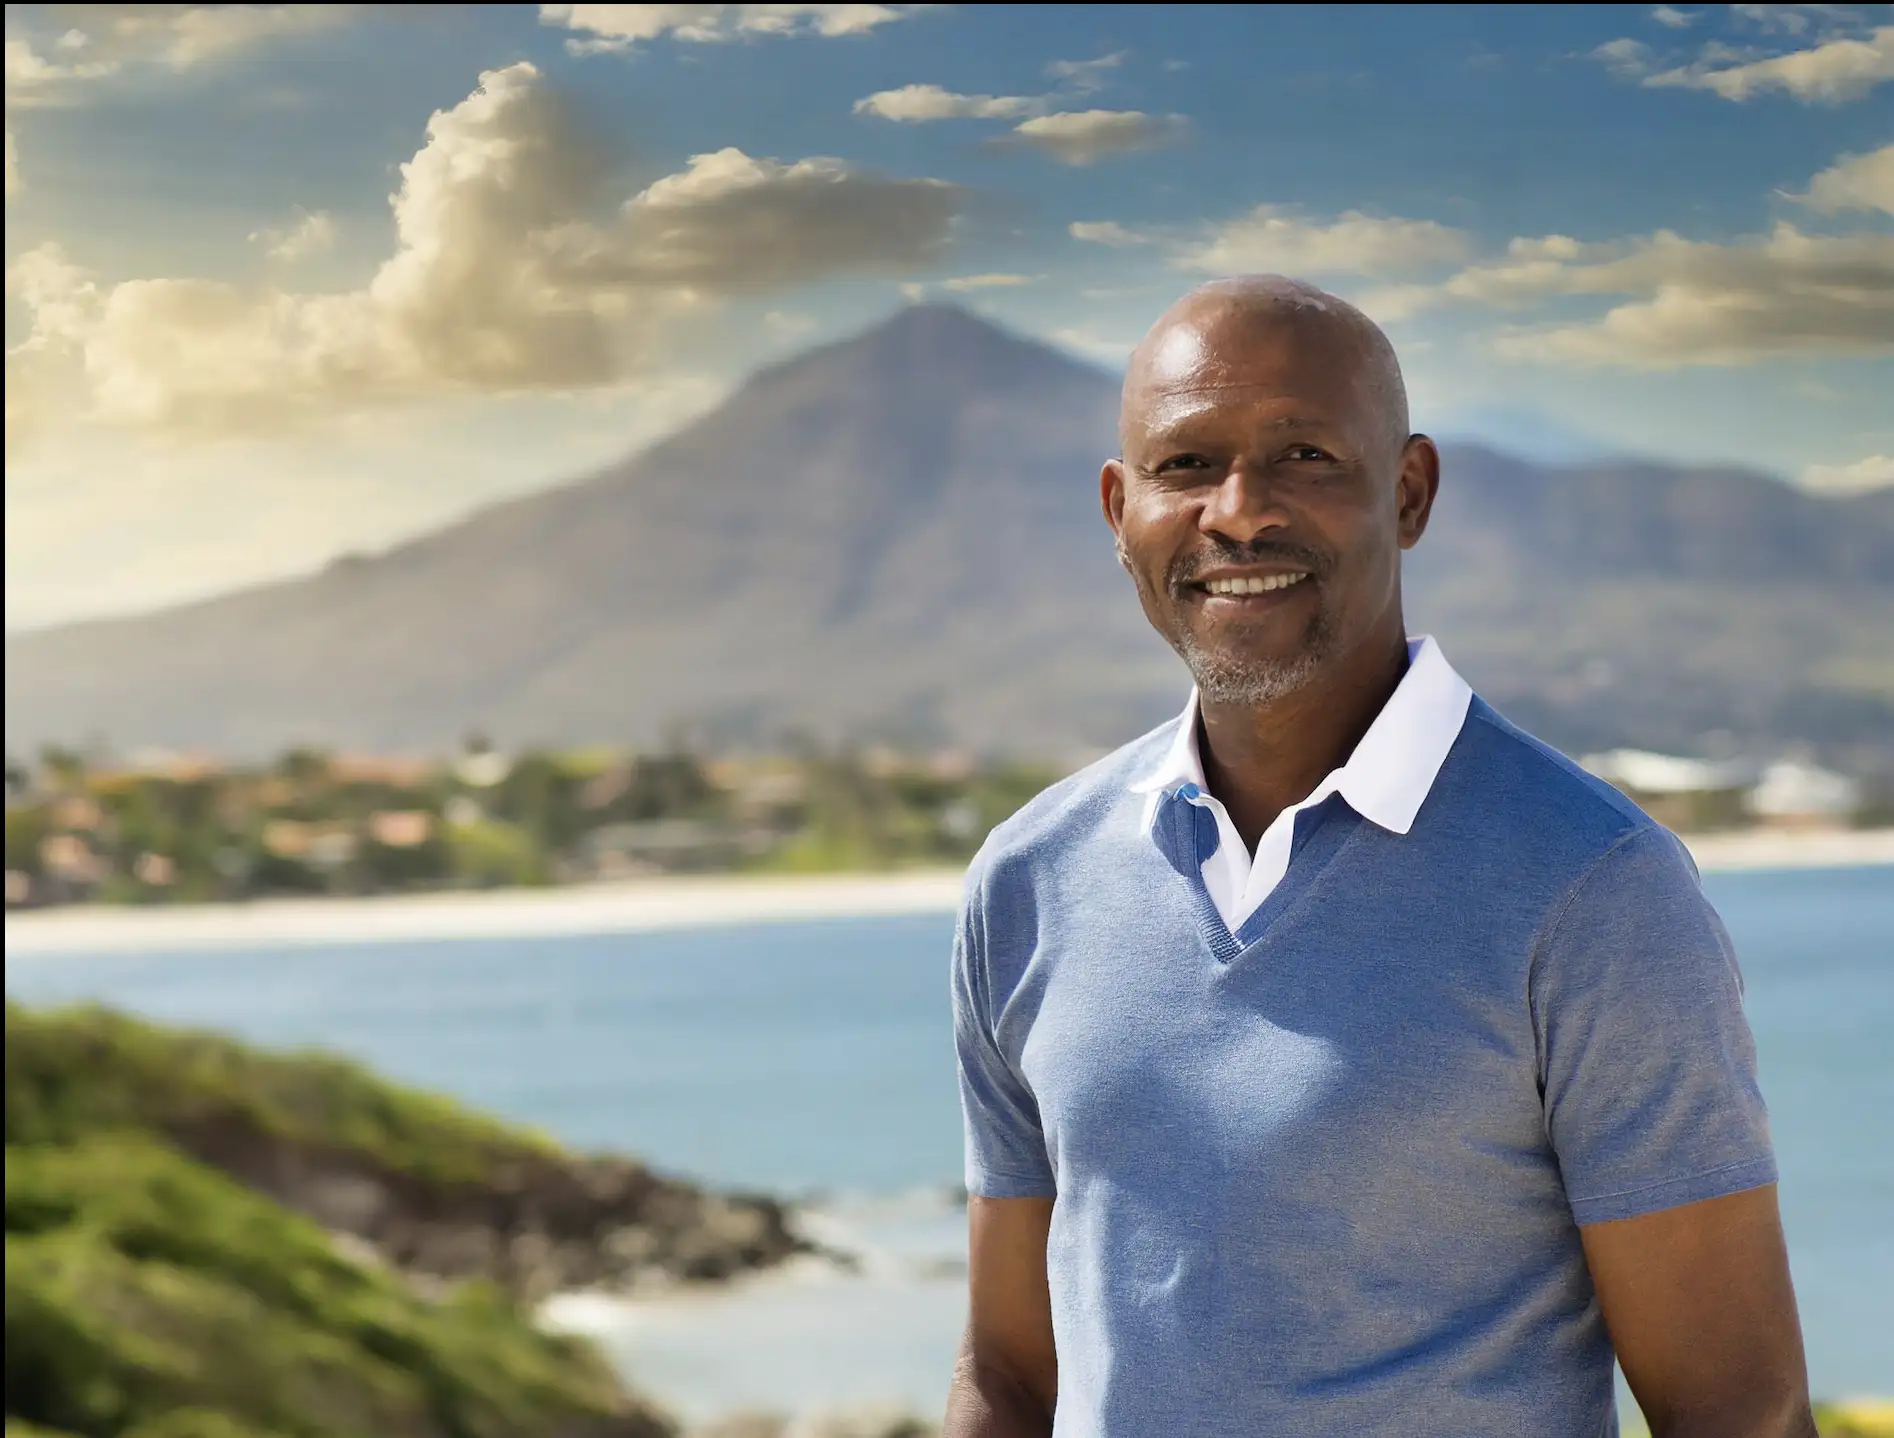 Older gentleman smiling in front of water and mountains